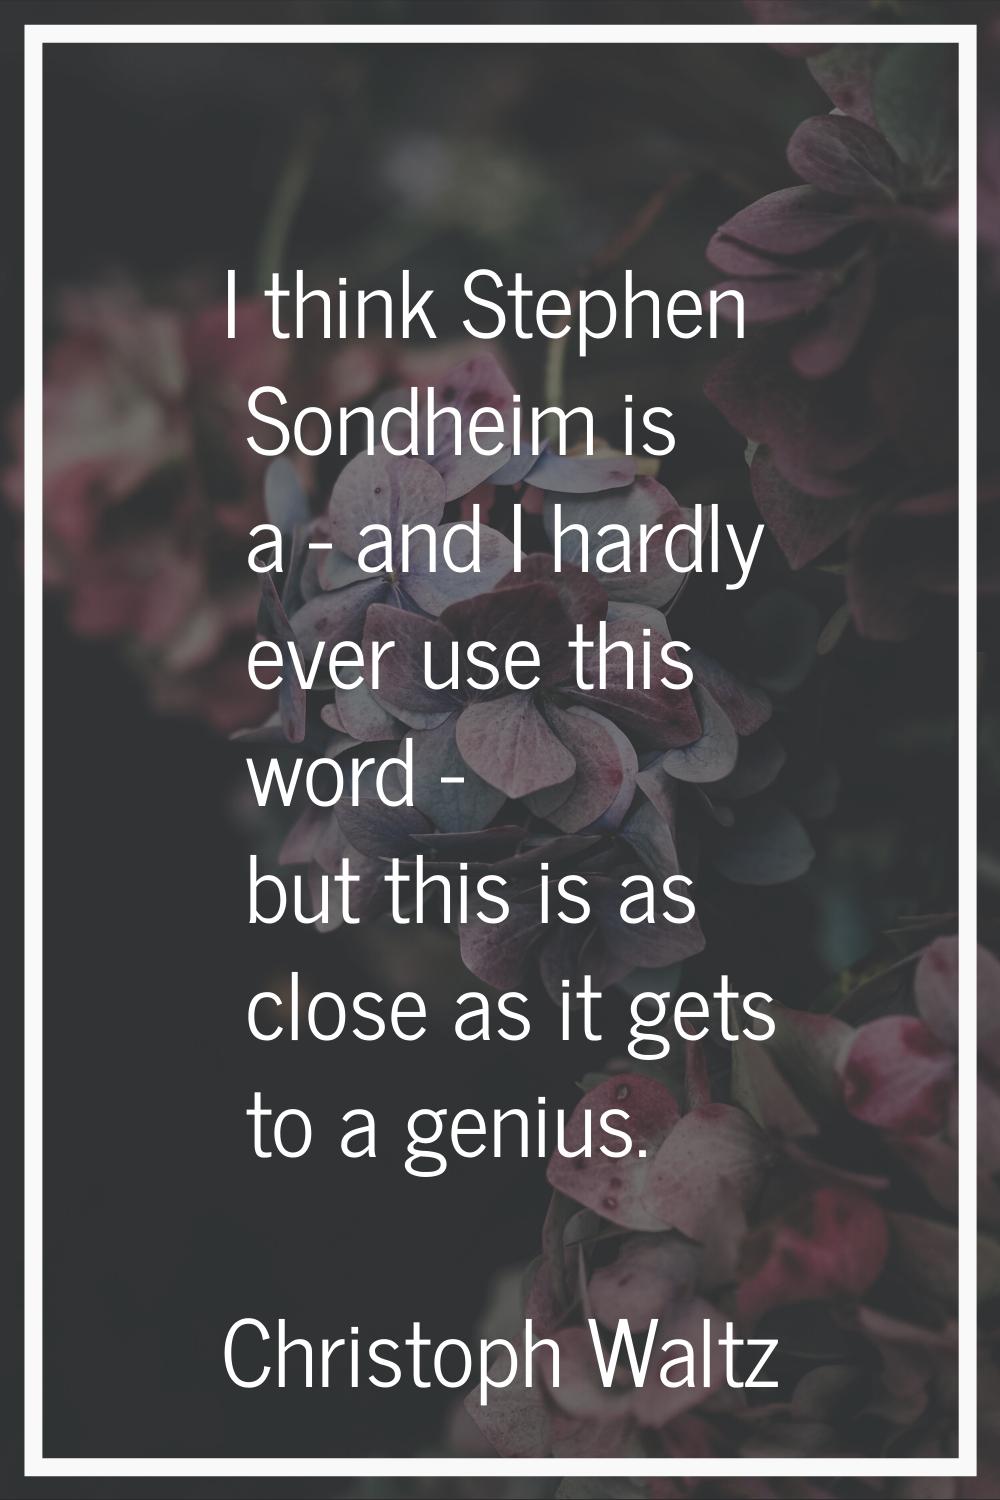 I think Stephen Sondheim is a - and I hardly ever use this word - but this is as close as it gets t